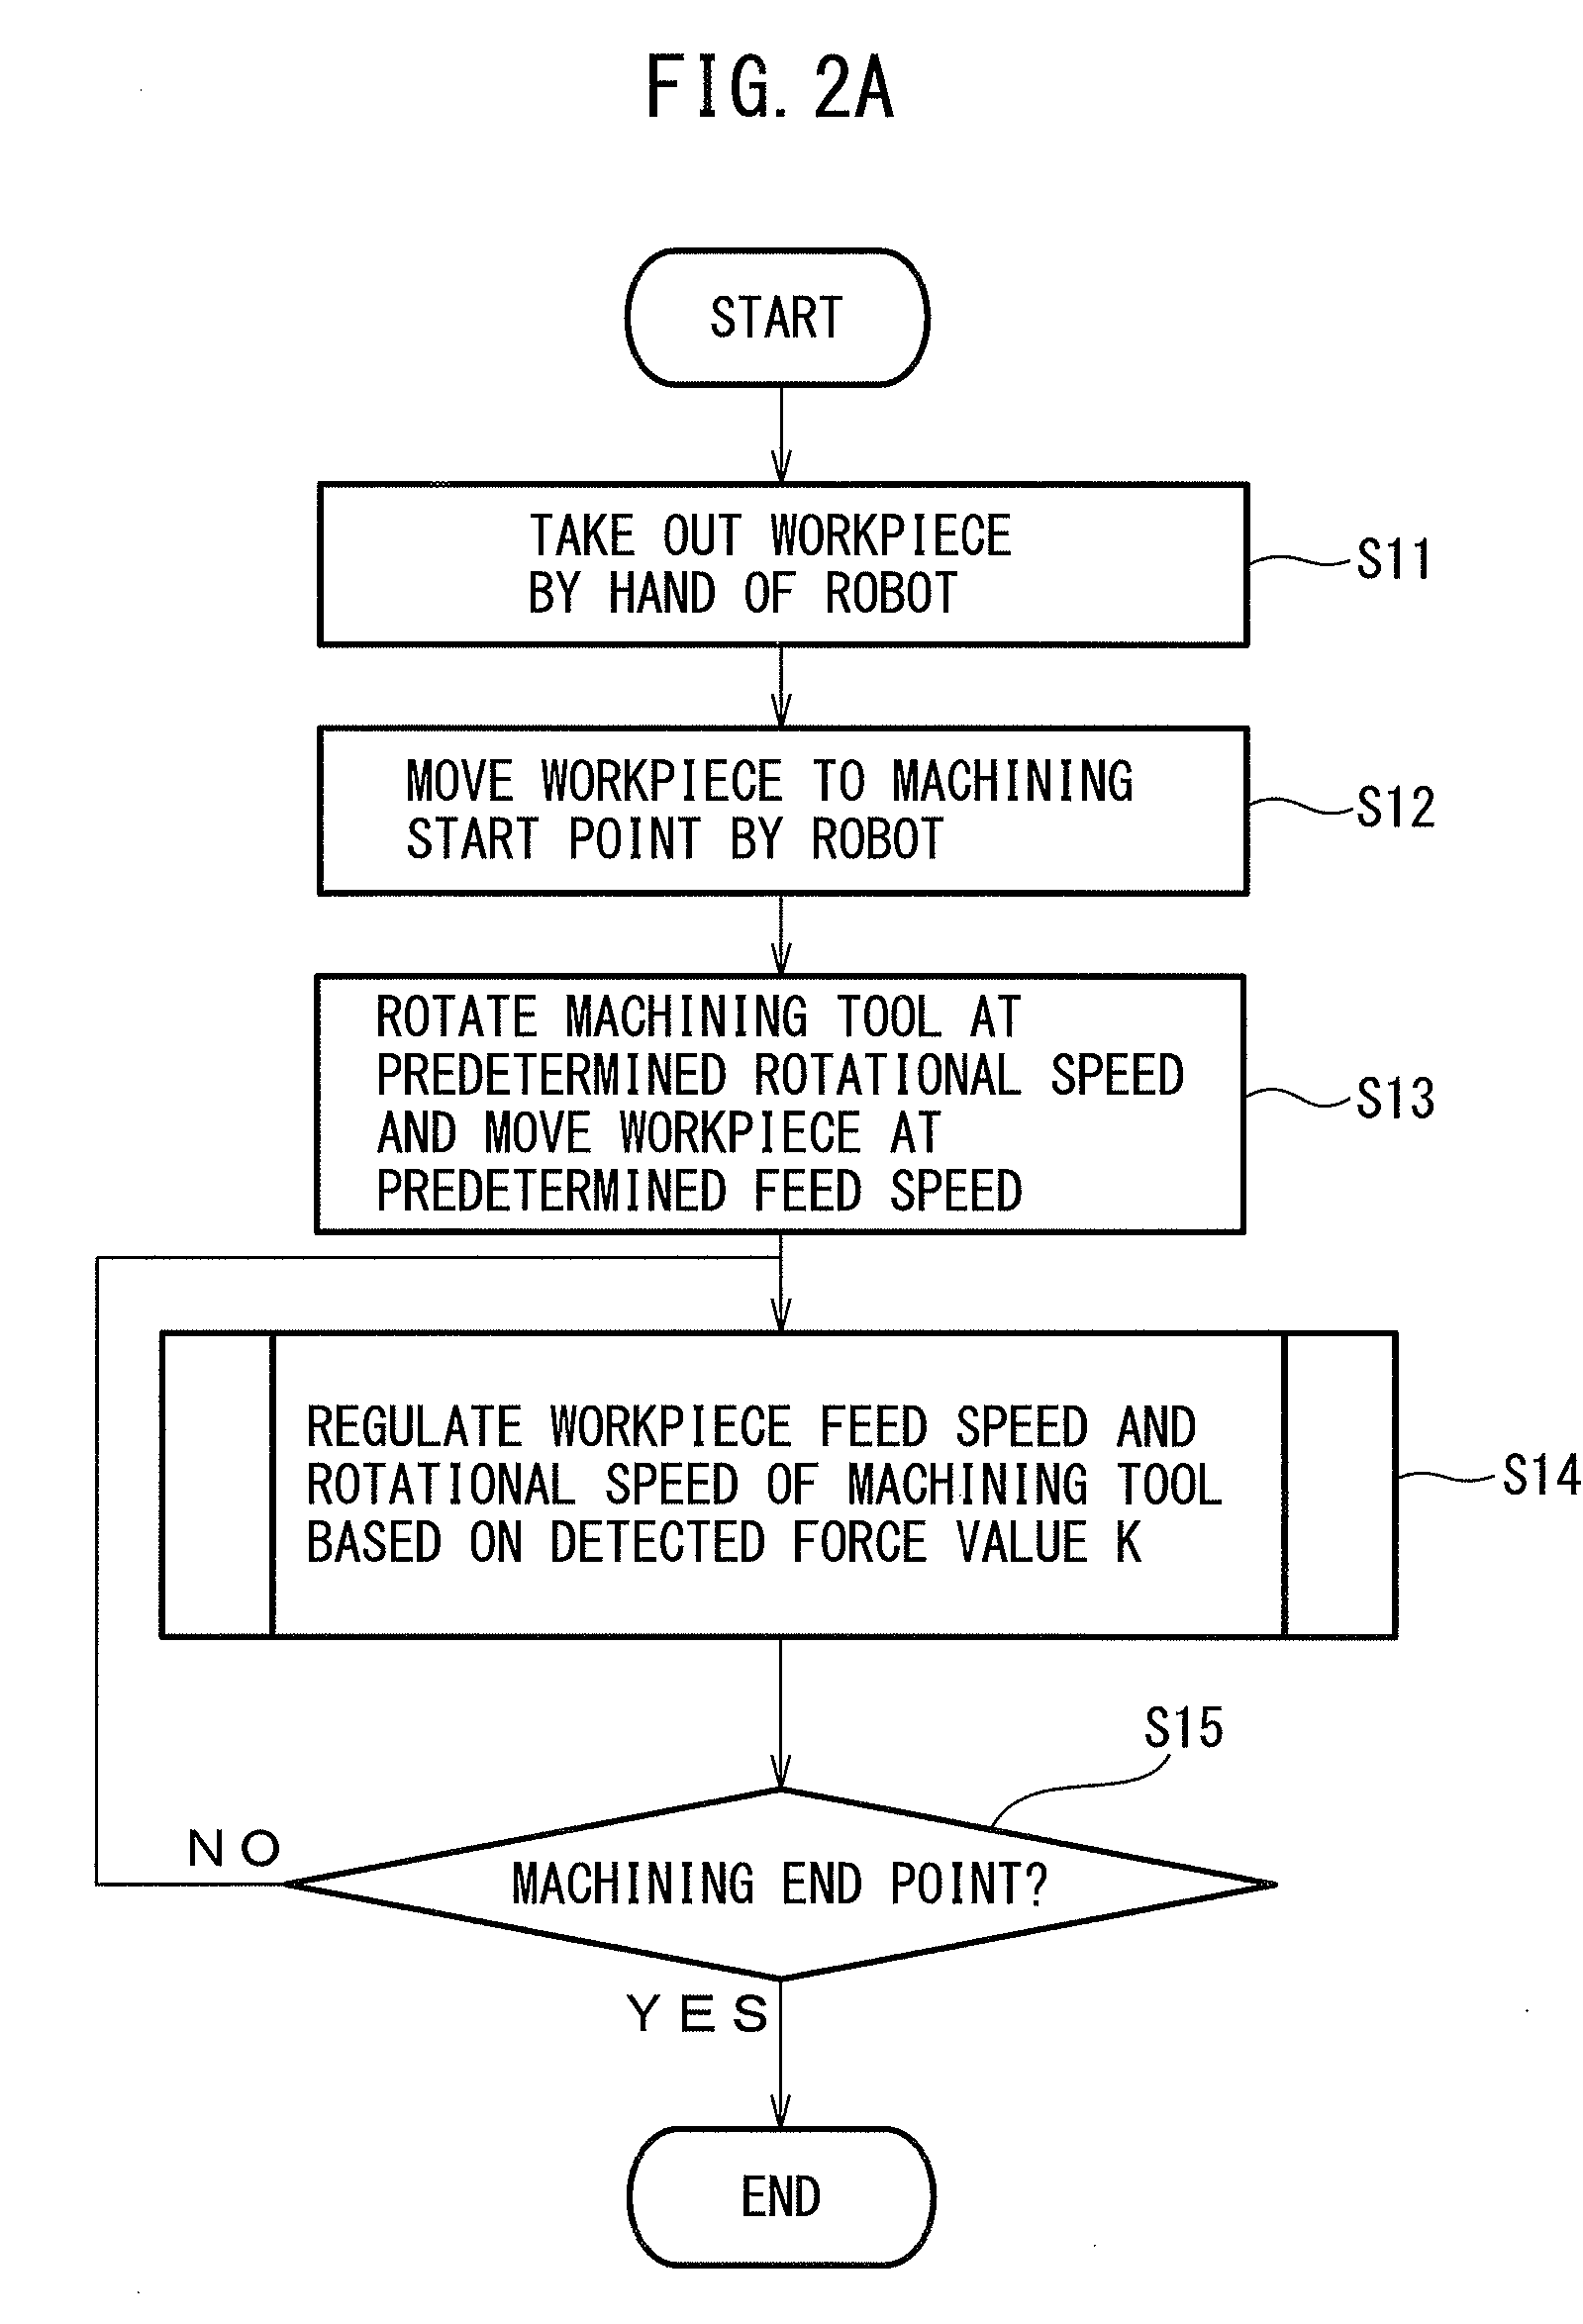 Machining system for adjusting number of revolutions of machining tool and feed speed of workpiece